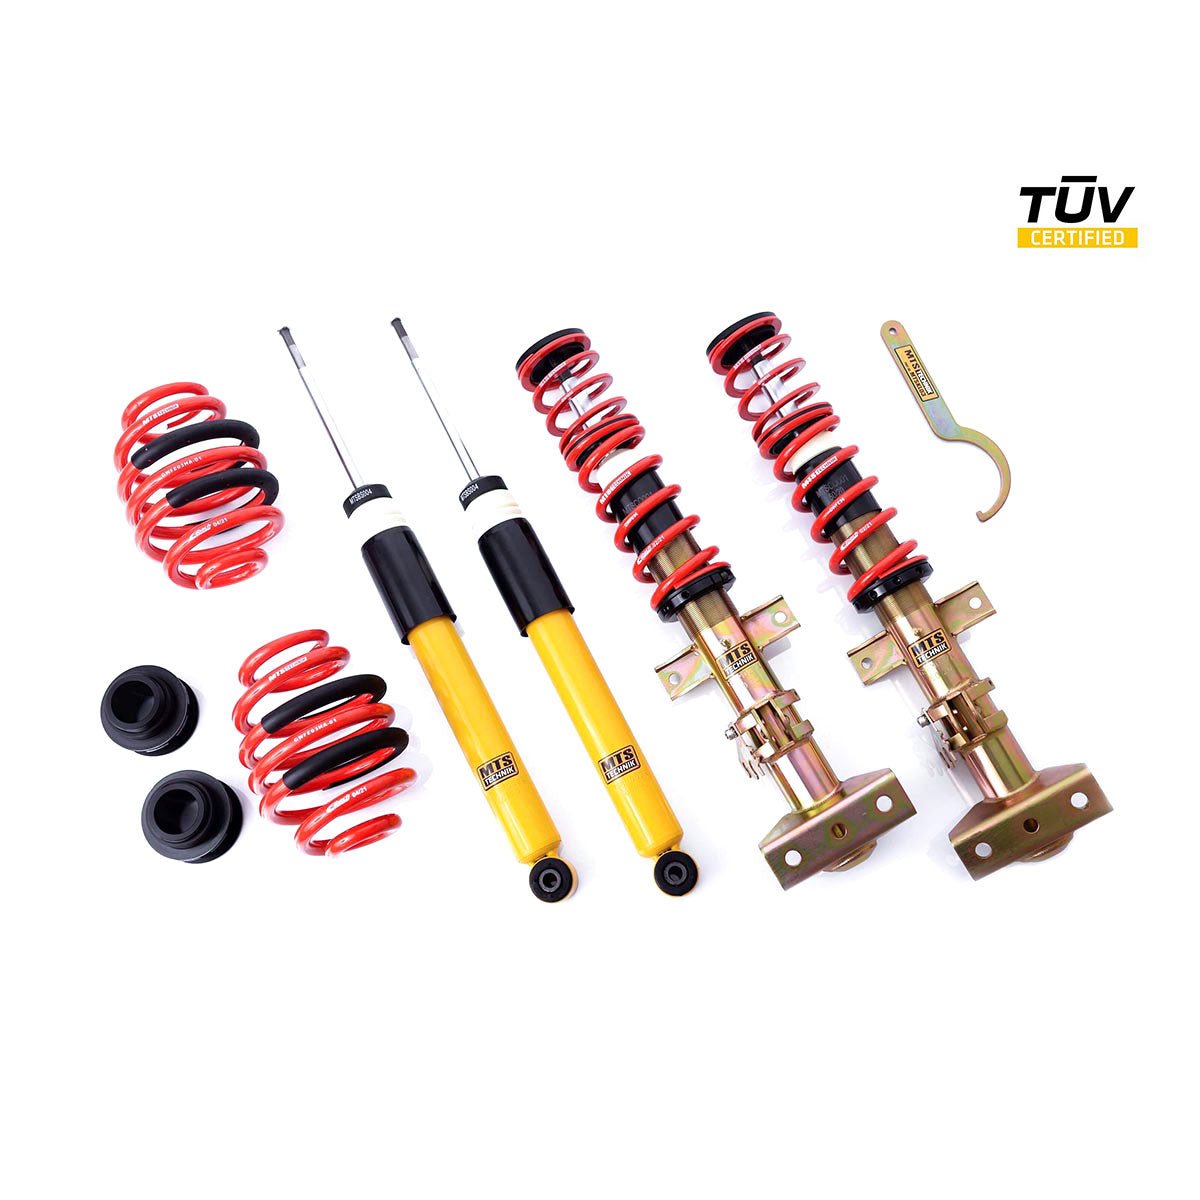 MTS TECHNIK coilover kit STREET BMW E36 Touring (with TÜV) - PARTS33 GmbH